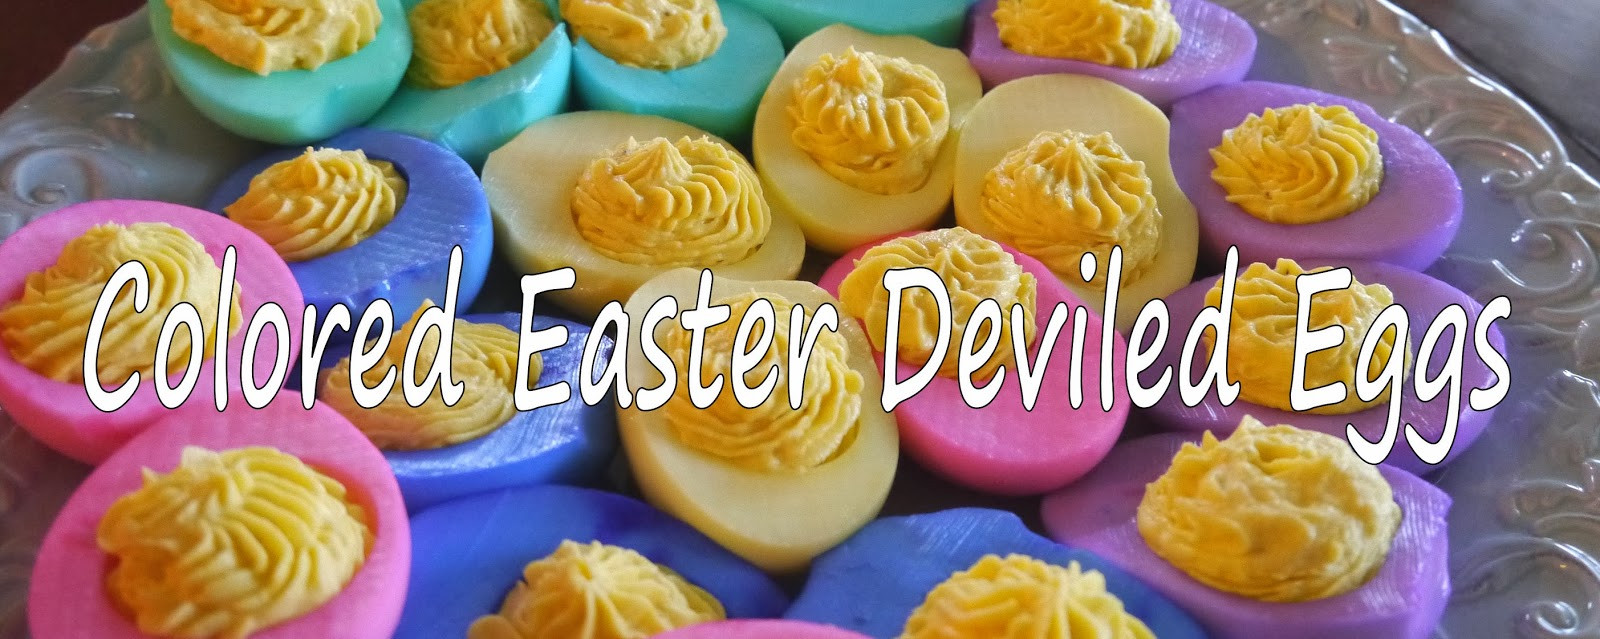 Easter Dyed Deviled Eggs
 I Can Totally Do That Colored Easter Deviled Eggs